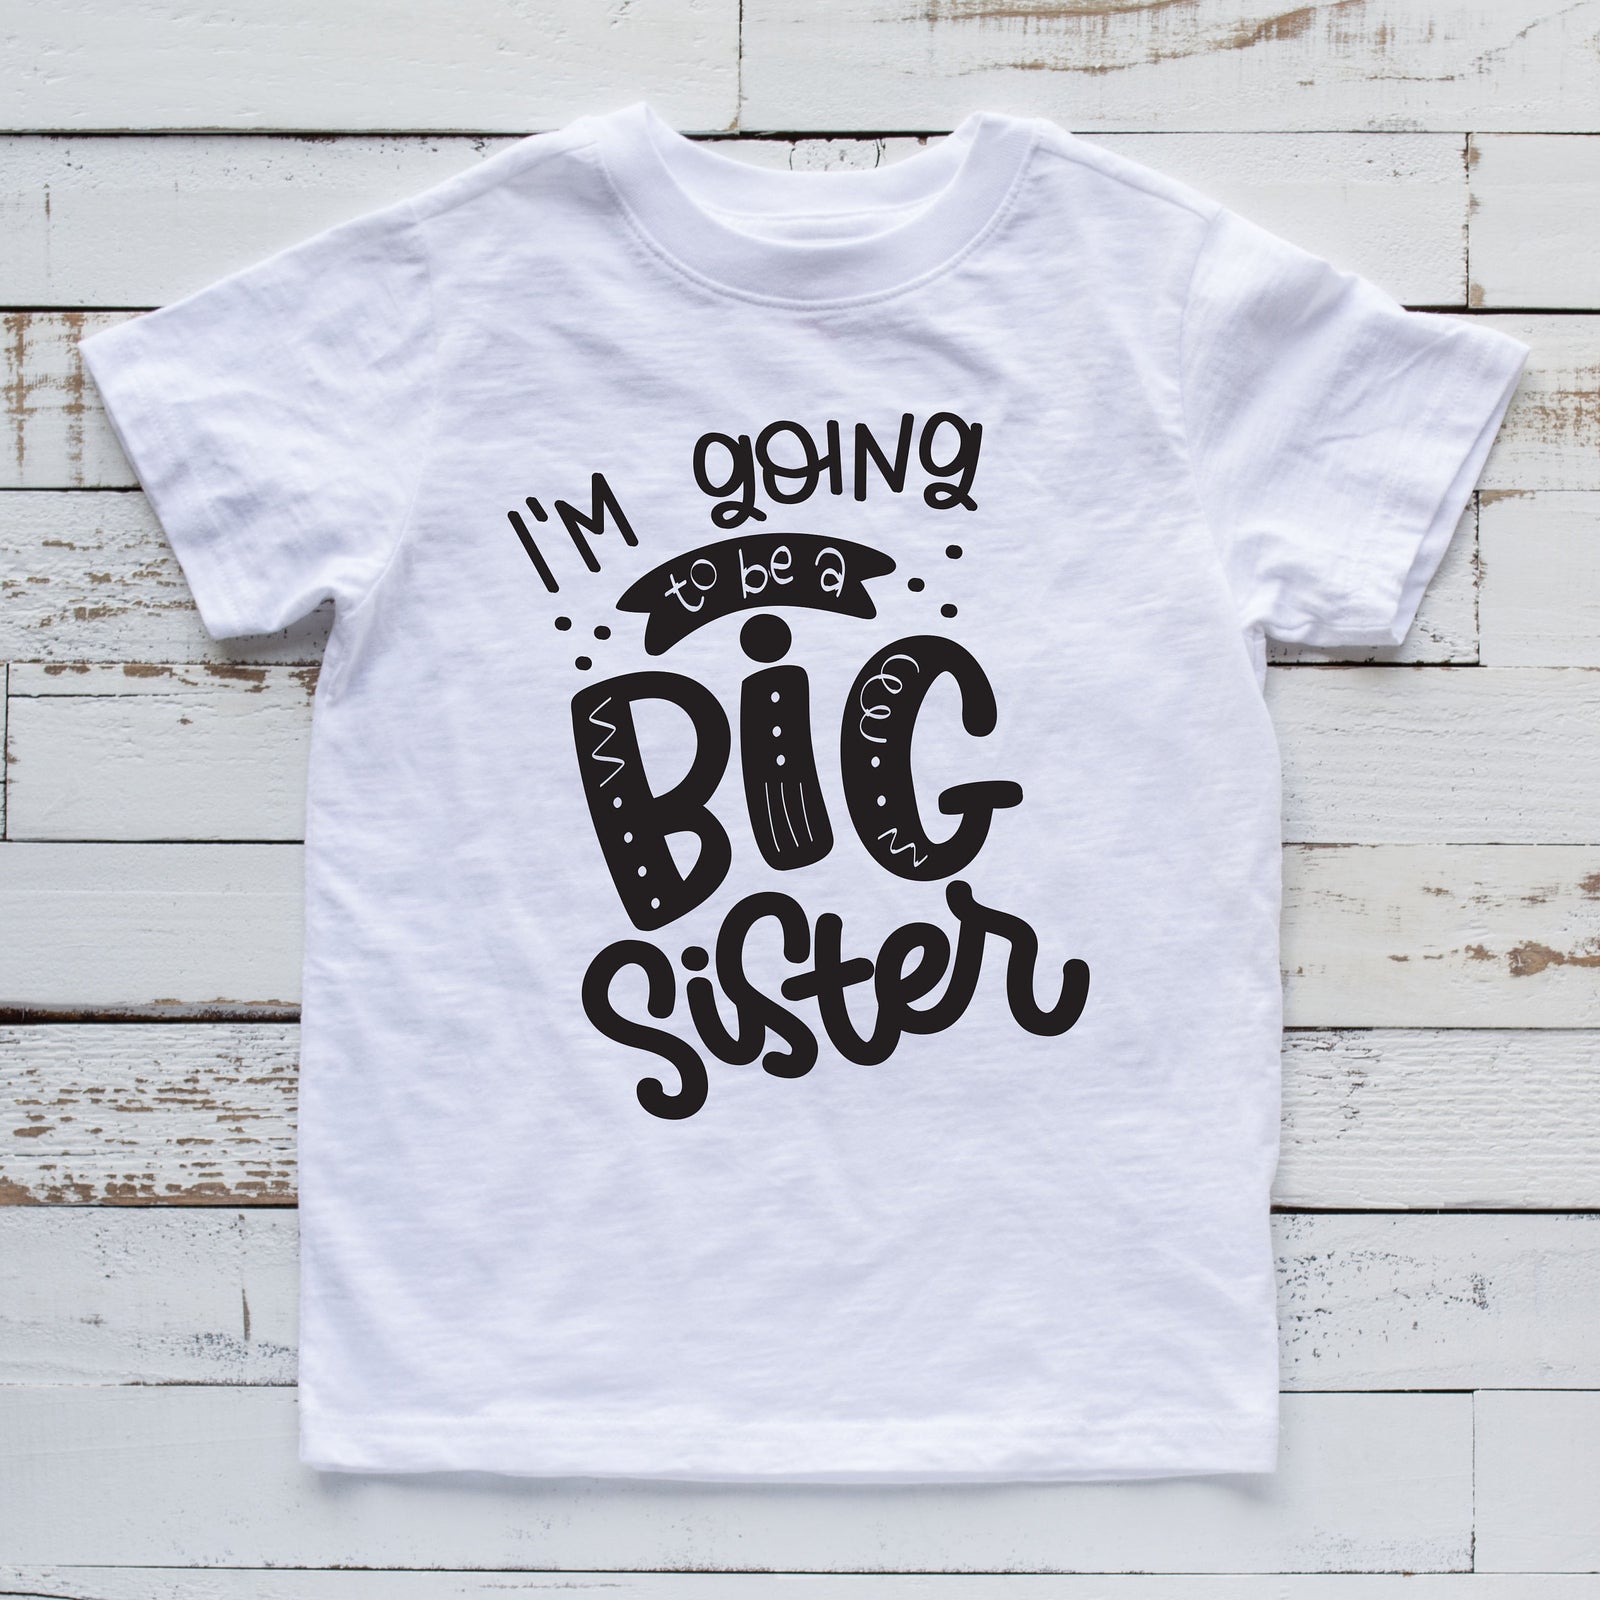 I'm Going to Be a Big Sister Shirt - Baby Announcement Shirt - Family Announcement Shirt - Big Sister Statement Shirt